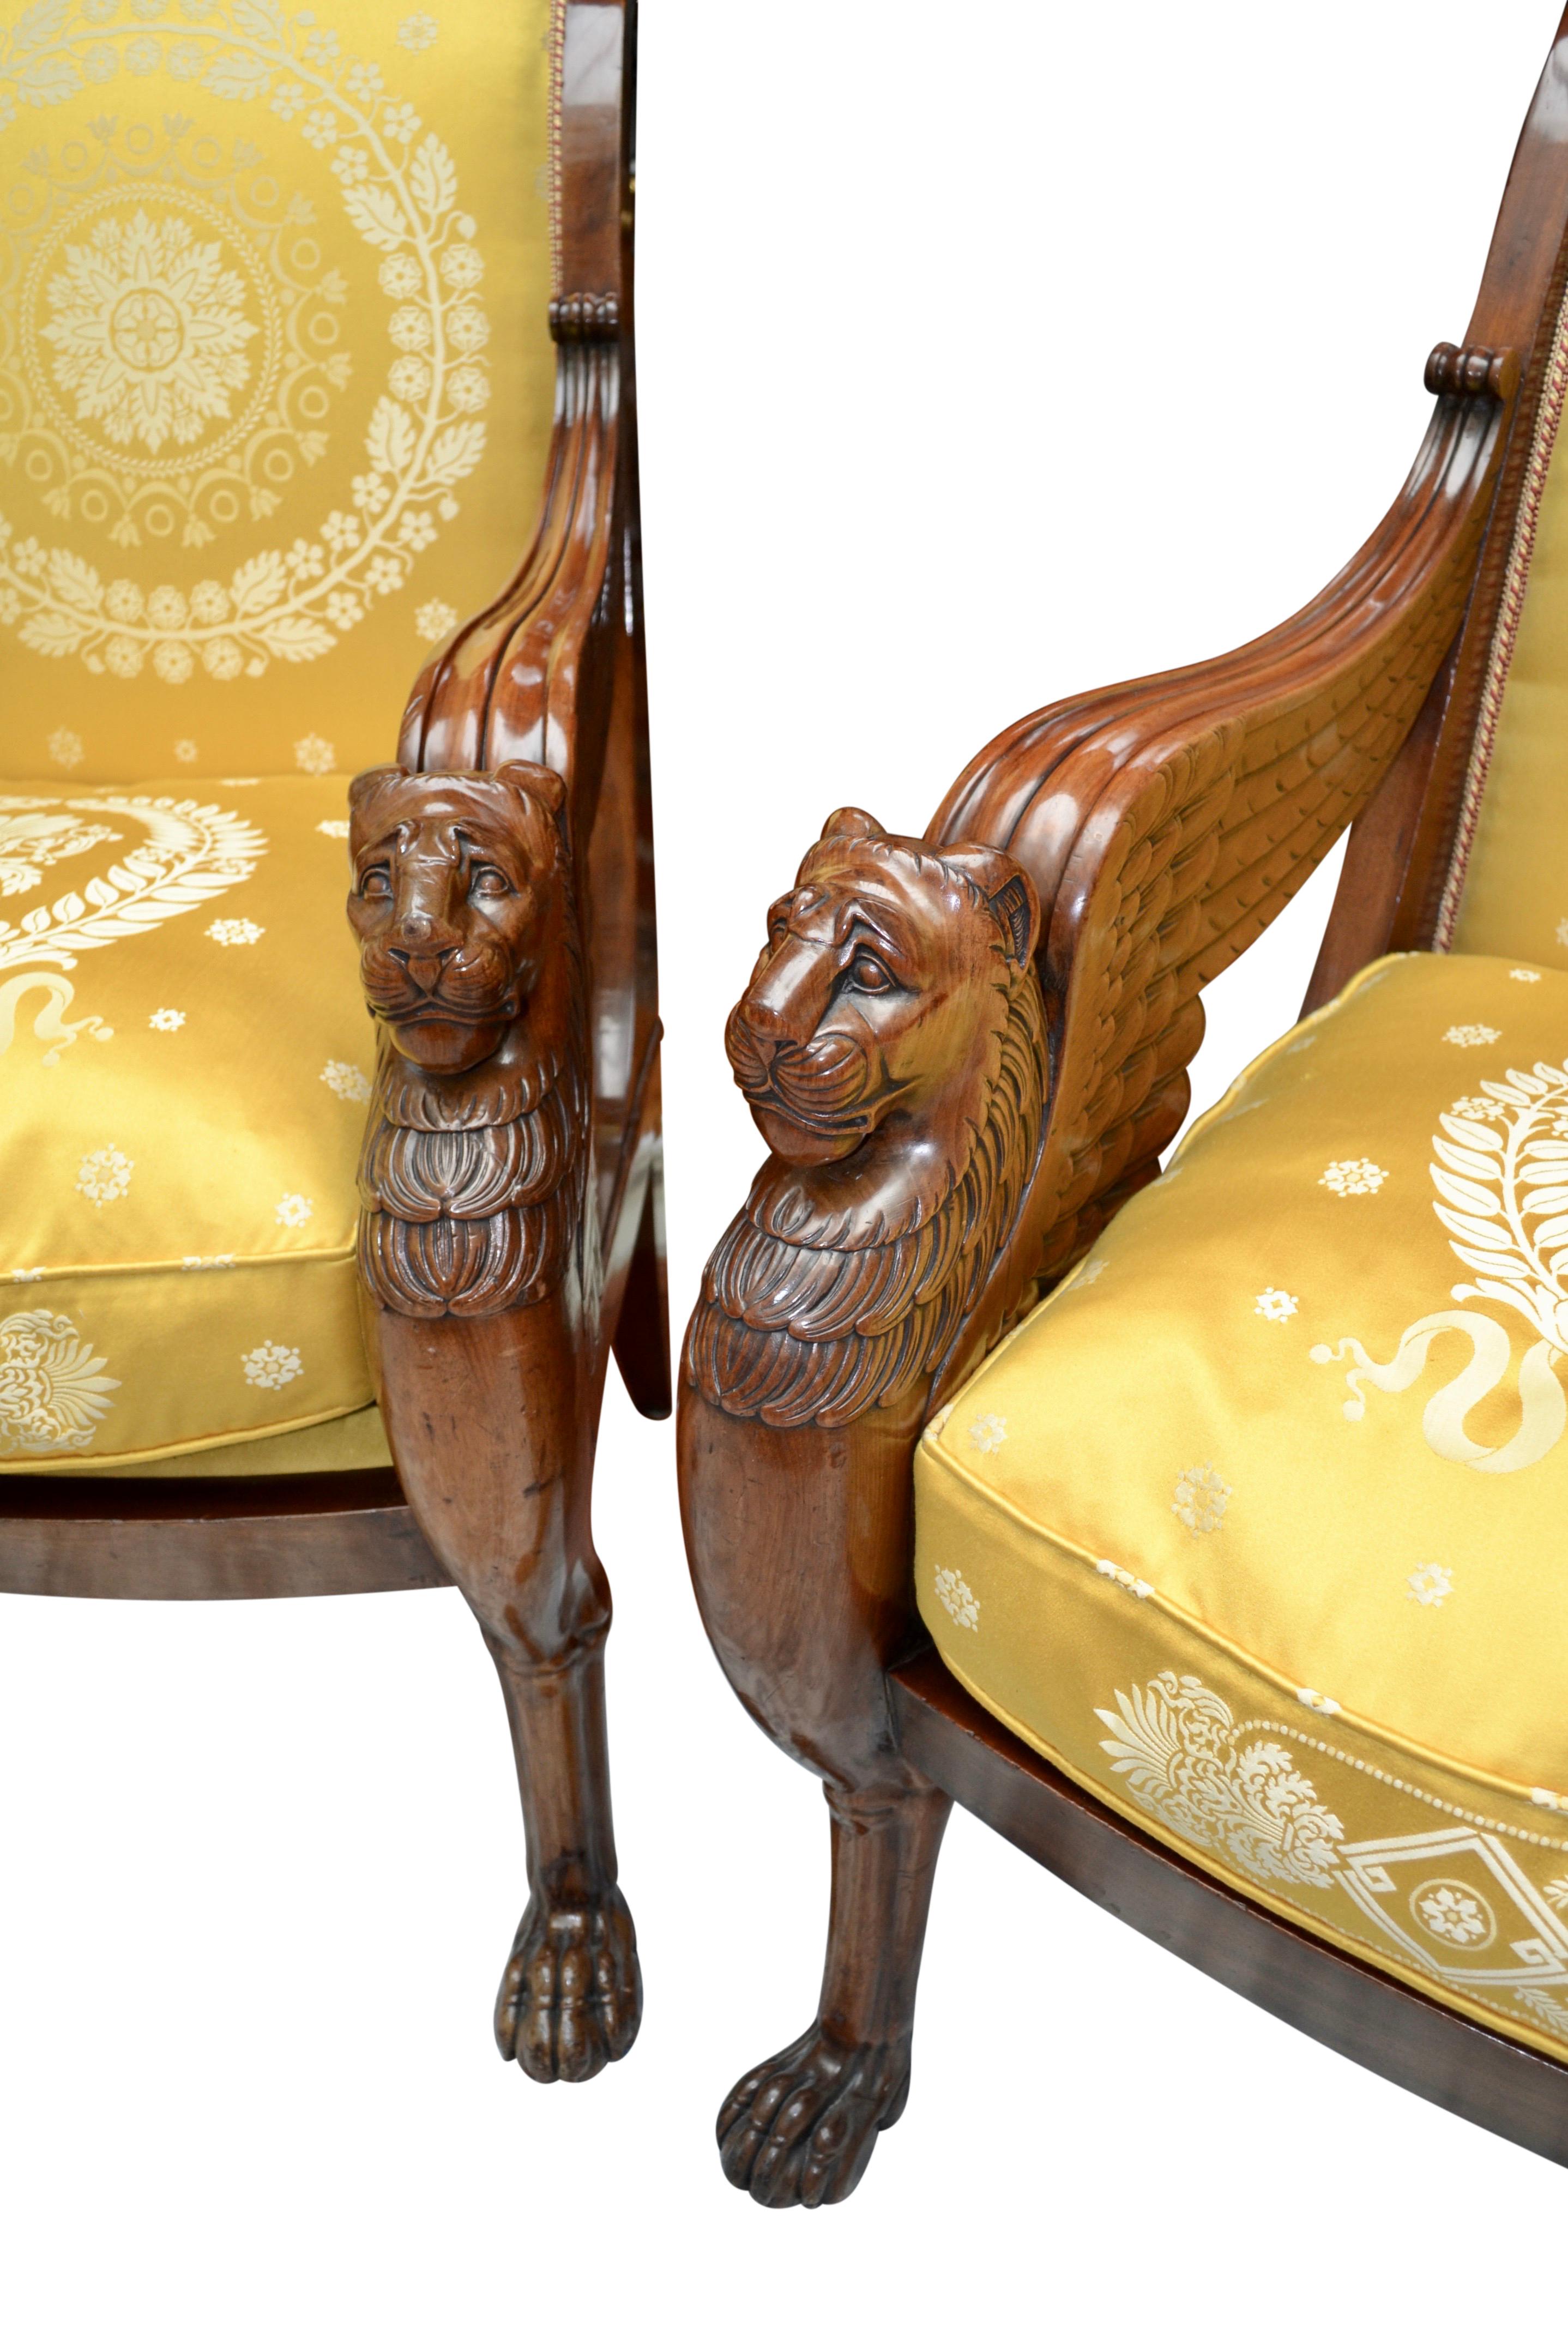 A pair of  imposing very rare  French Empire style armchairs attributed to the firm of Jacob Desmalter; the front legs crisply carved as winged lions with hairy paw feet; the lion’s wings extending to the curved back rail; likely made in the second